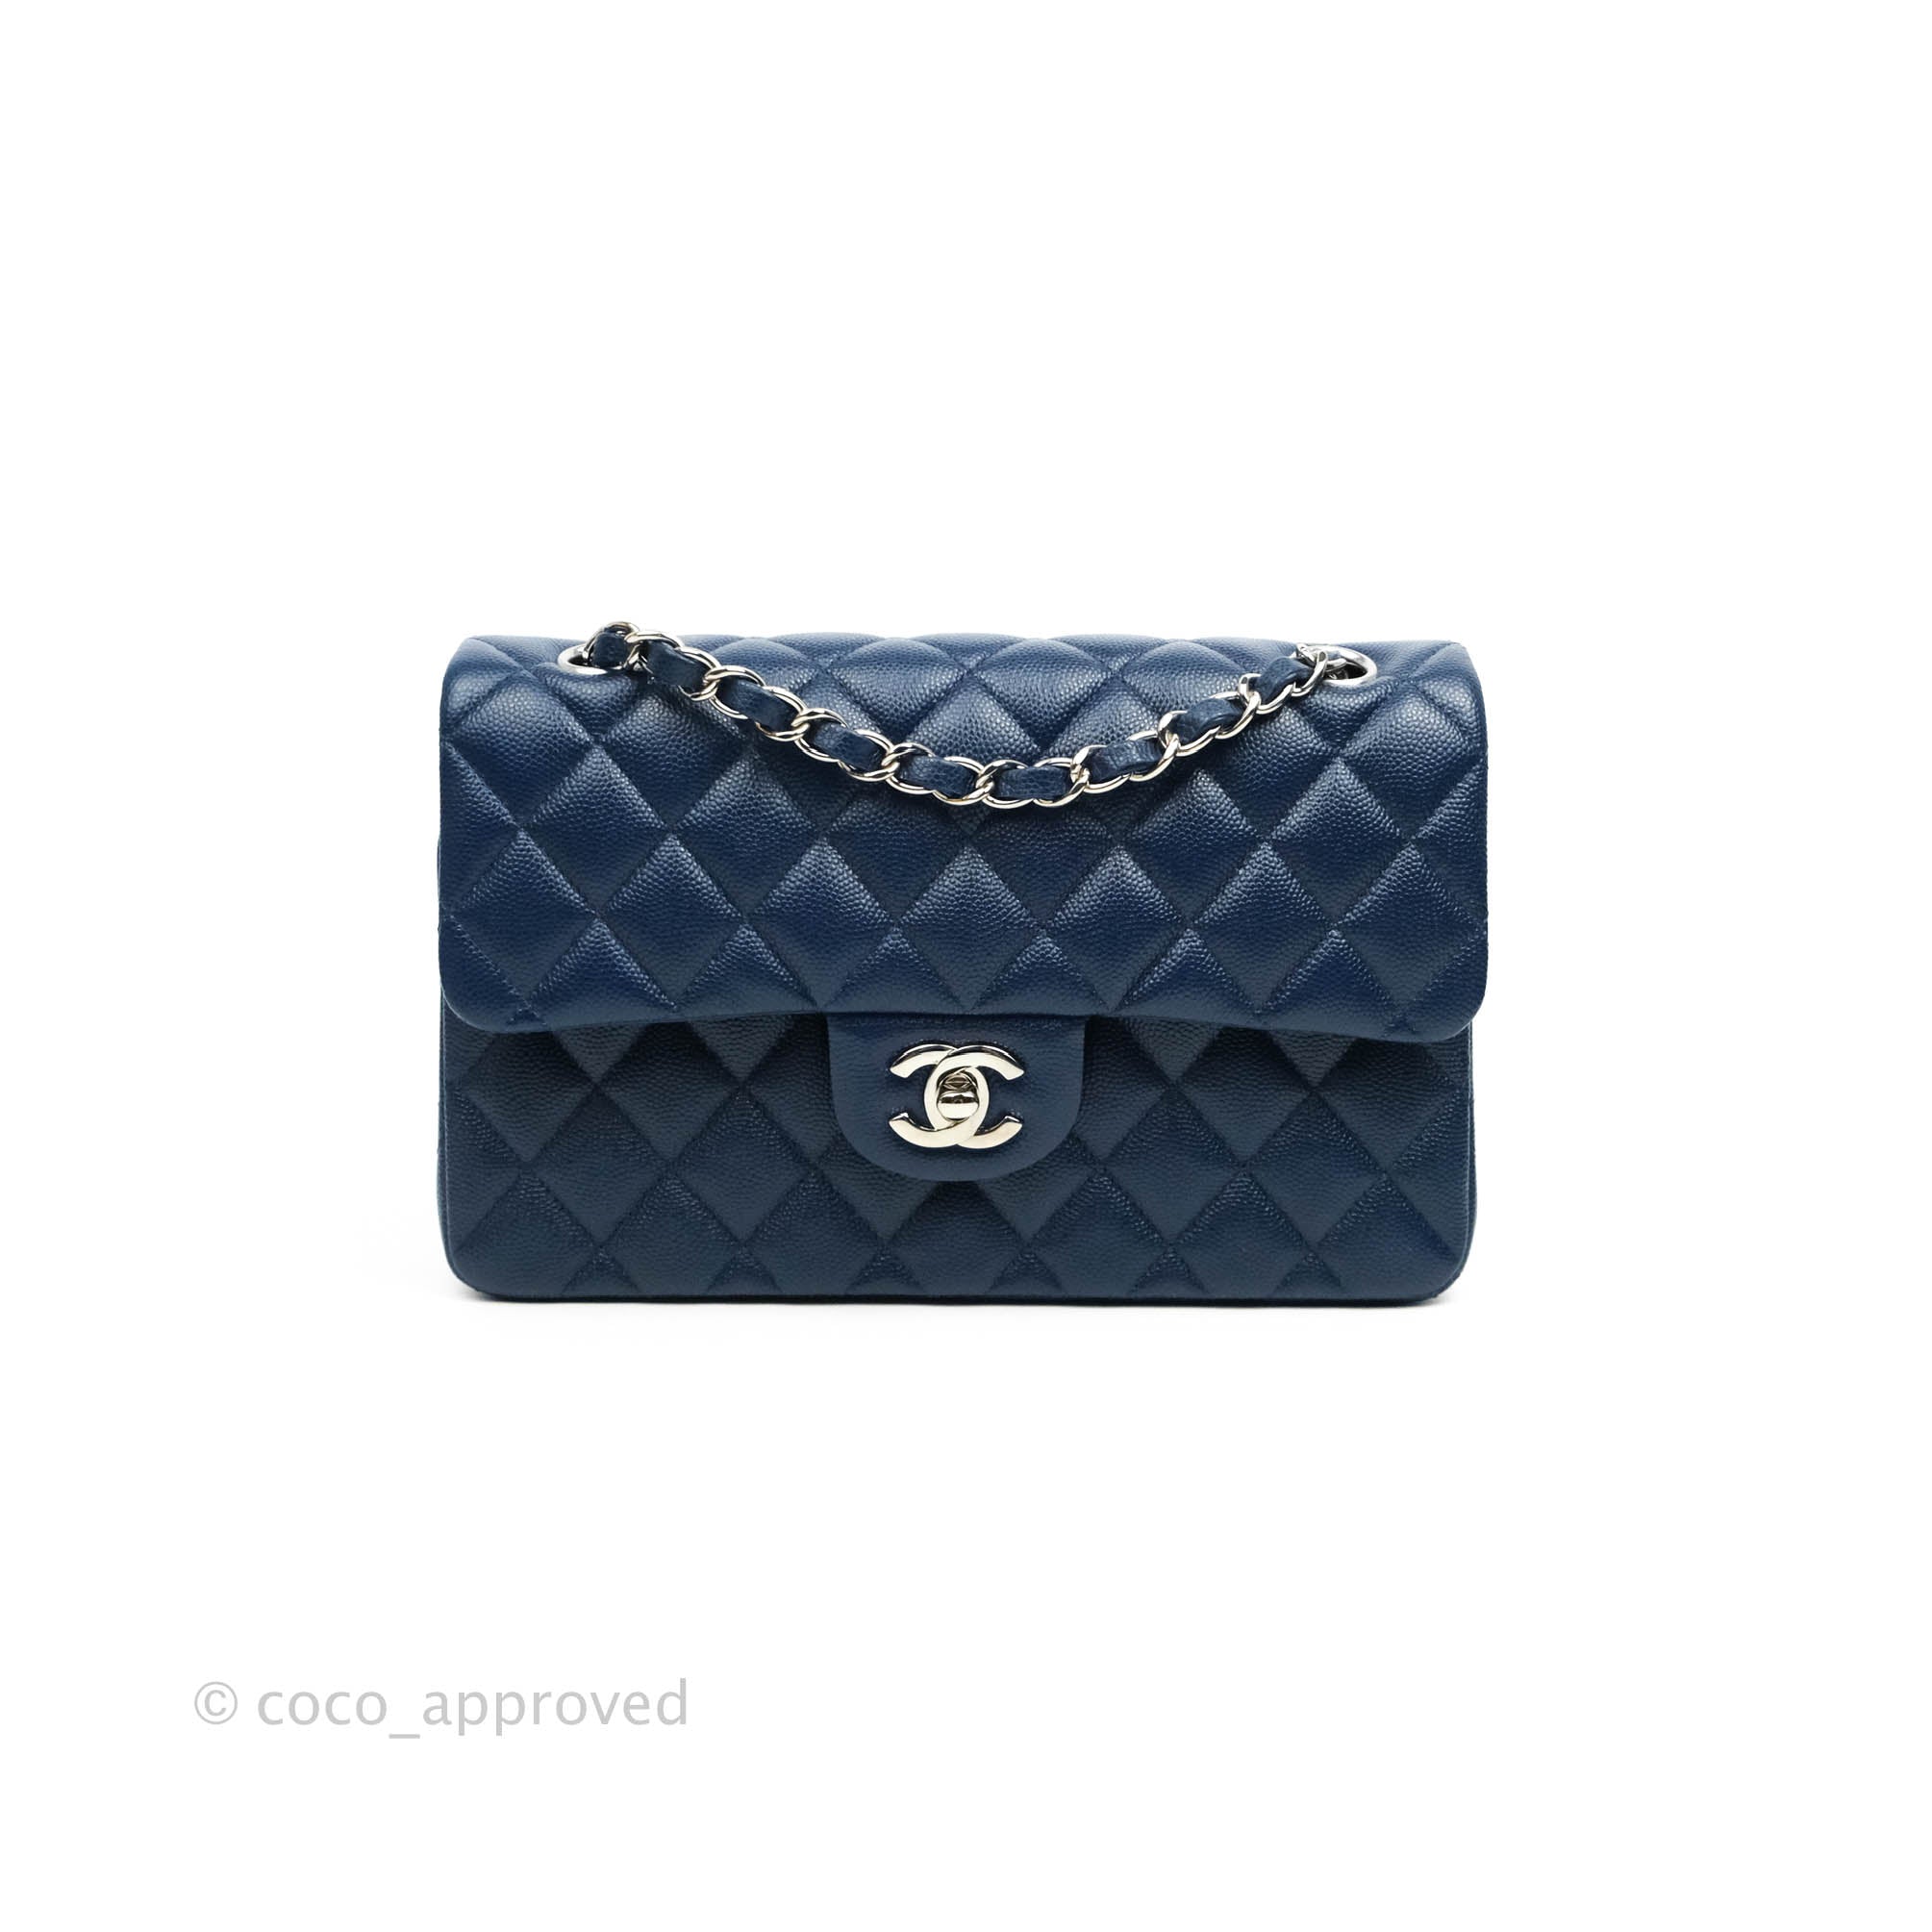 Chanel Classic Bag in Navy and Black (2015/16) — singulié